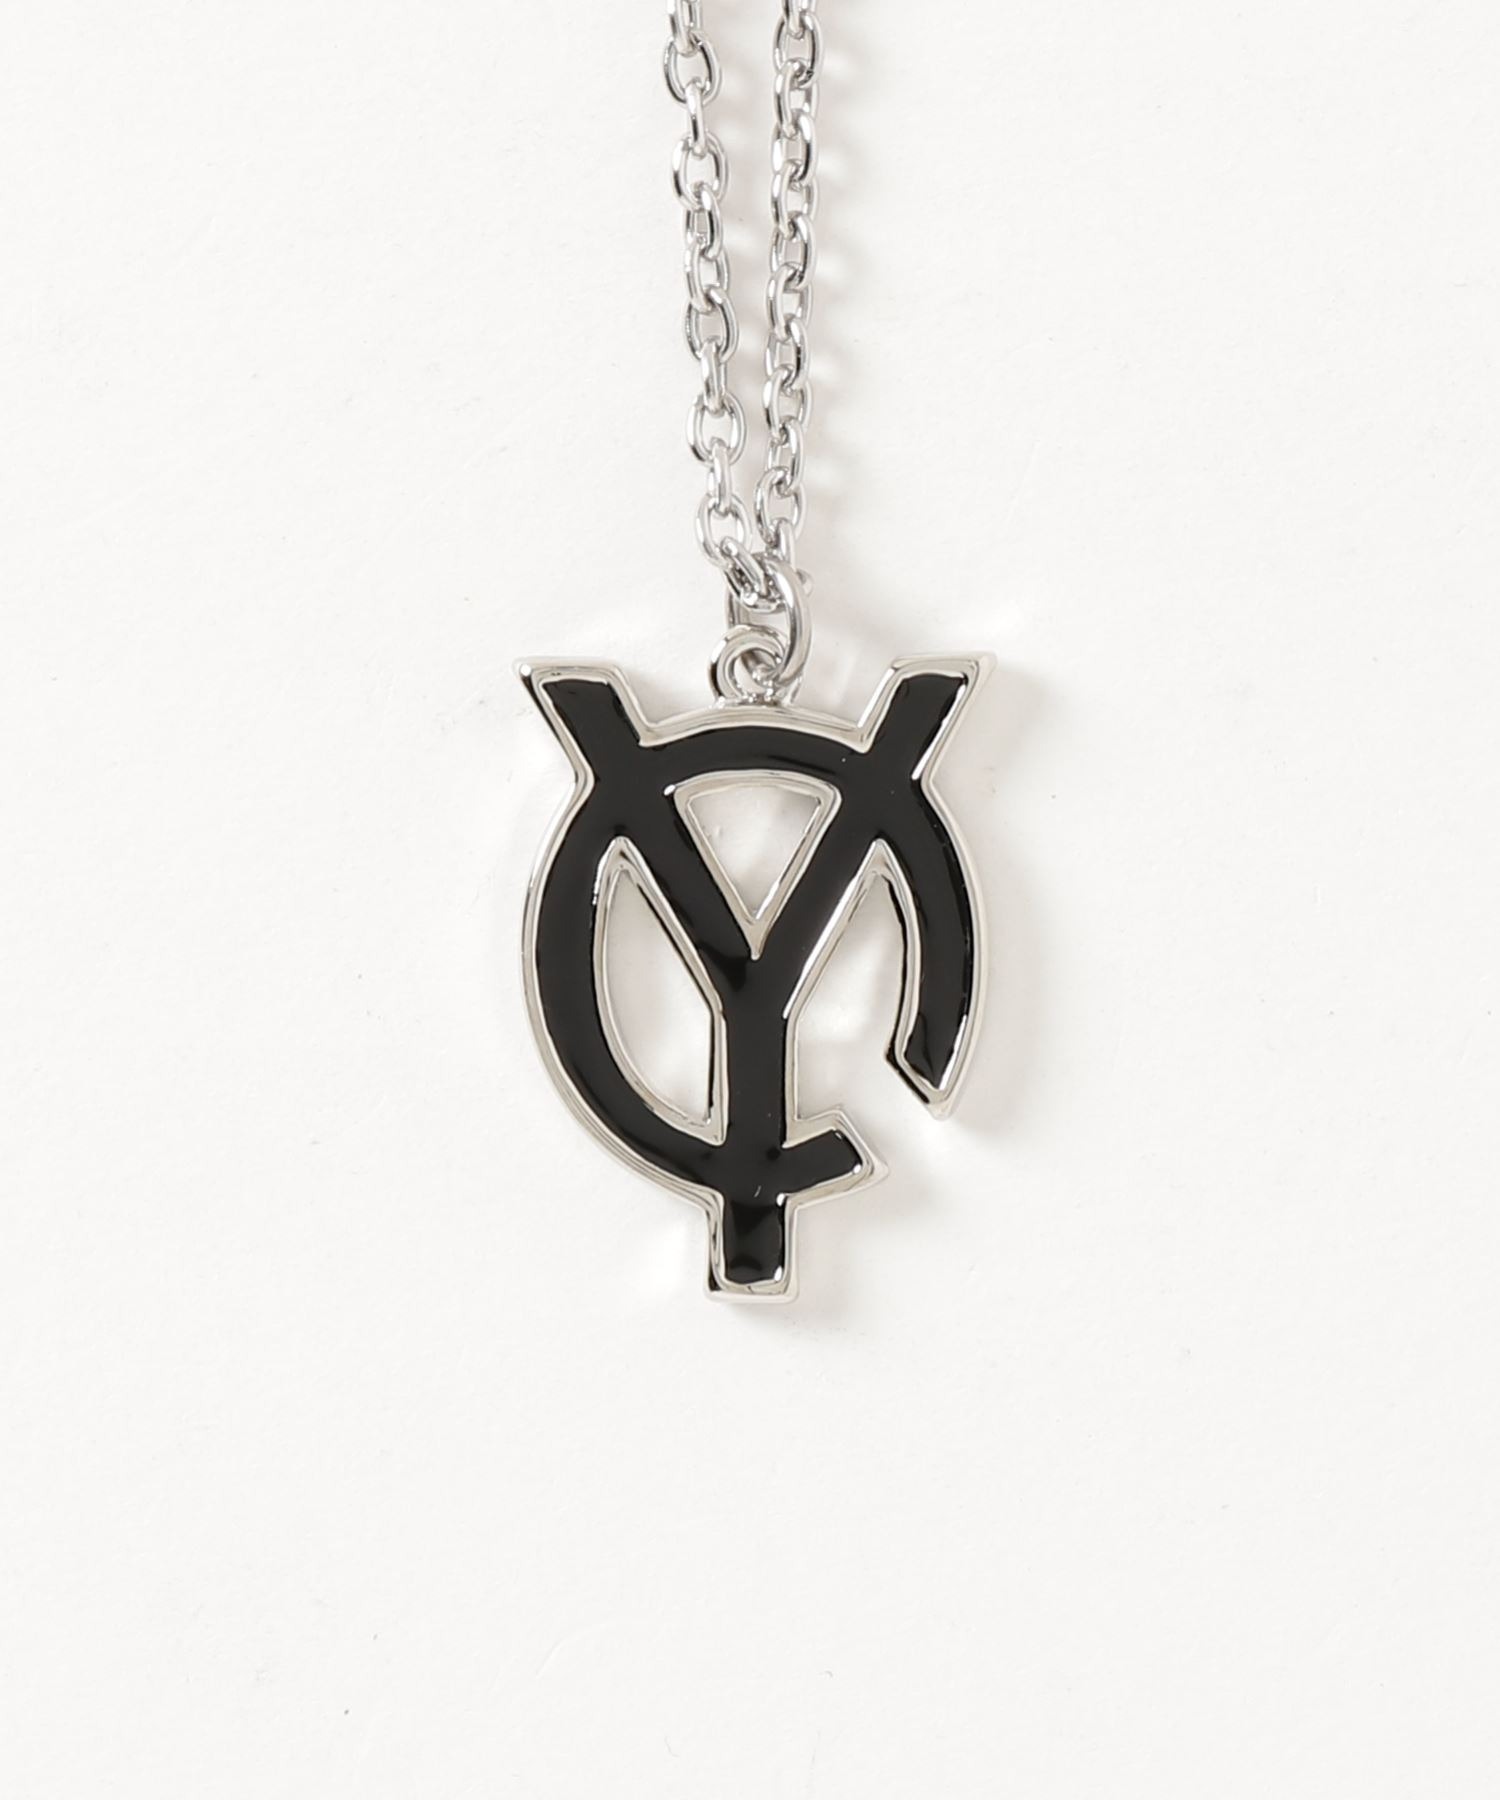 OY/オーワイ』LOGO CHAIN NECKLACE/ロゴ チェーン ネックレス OY│A